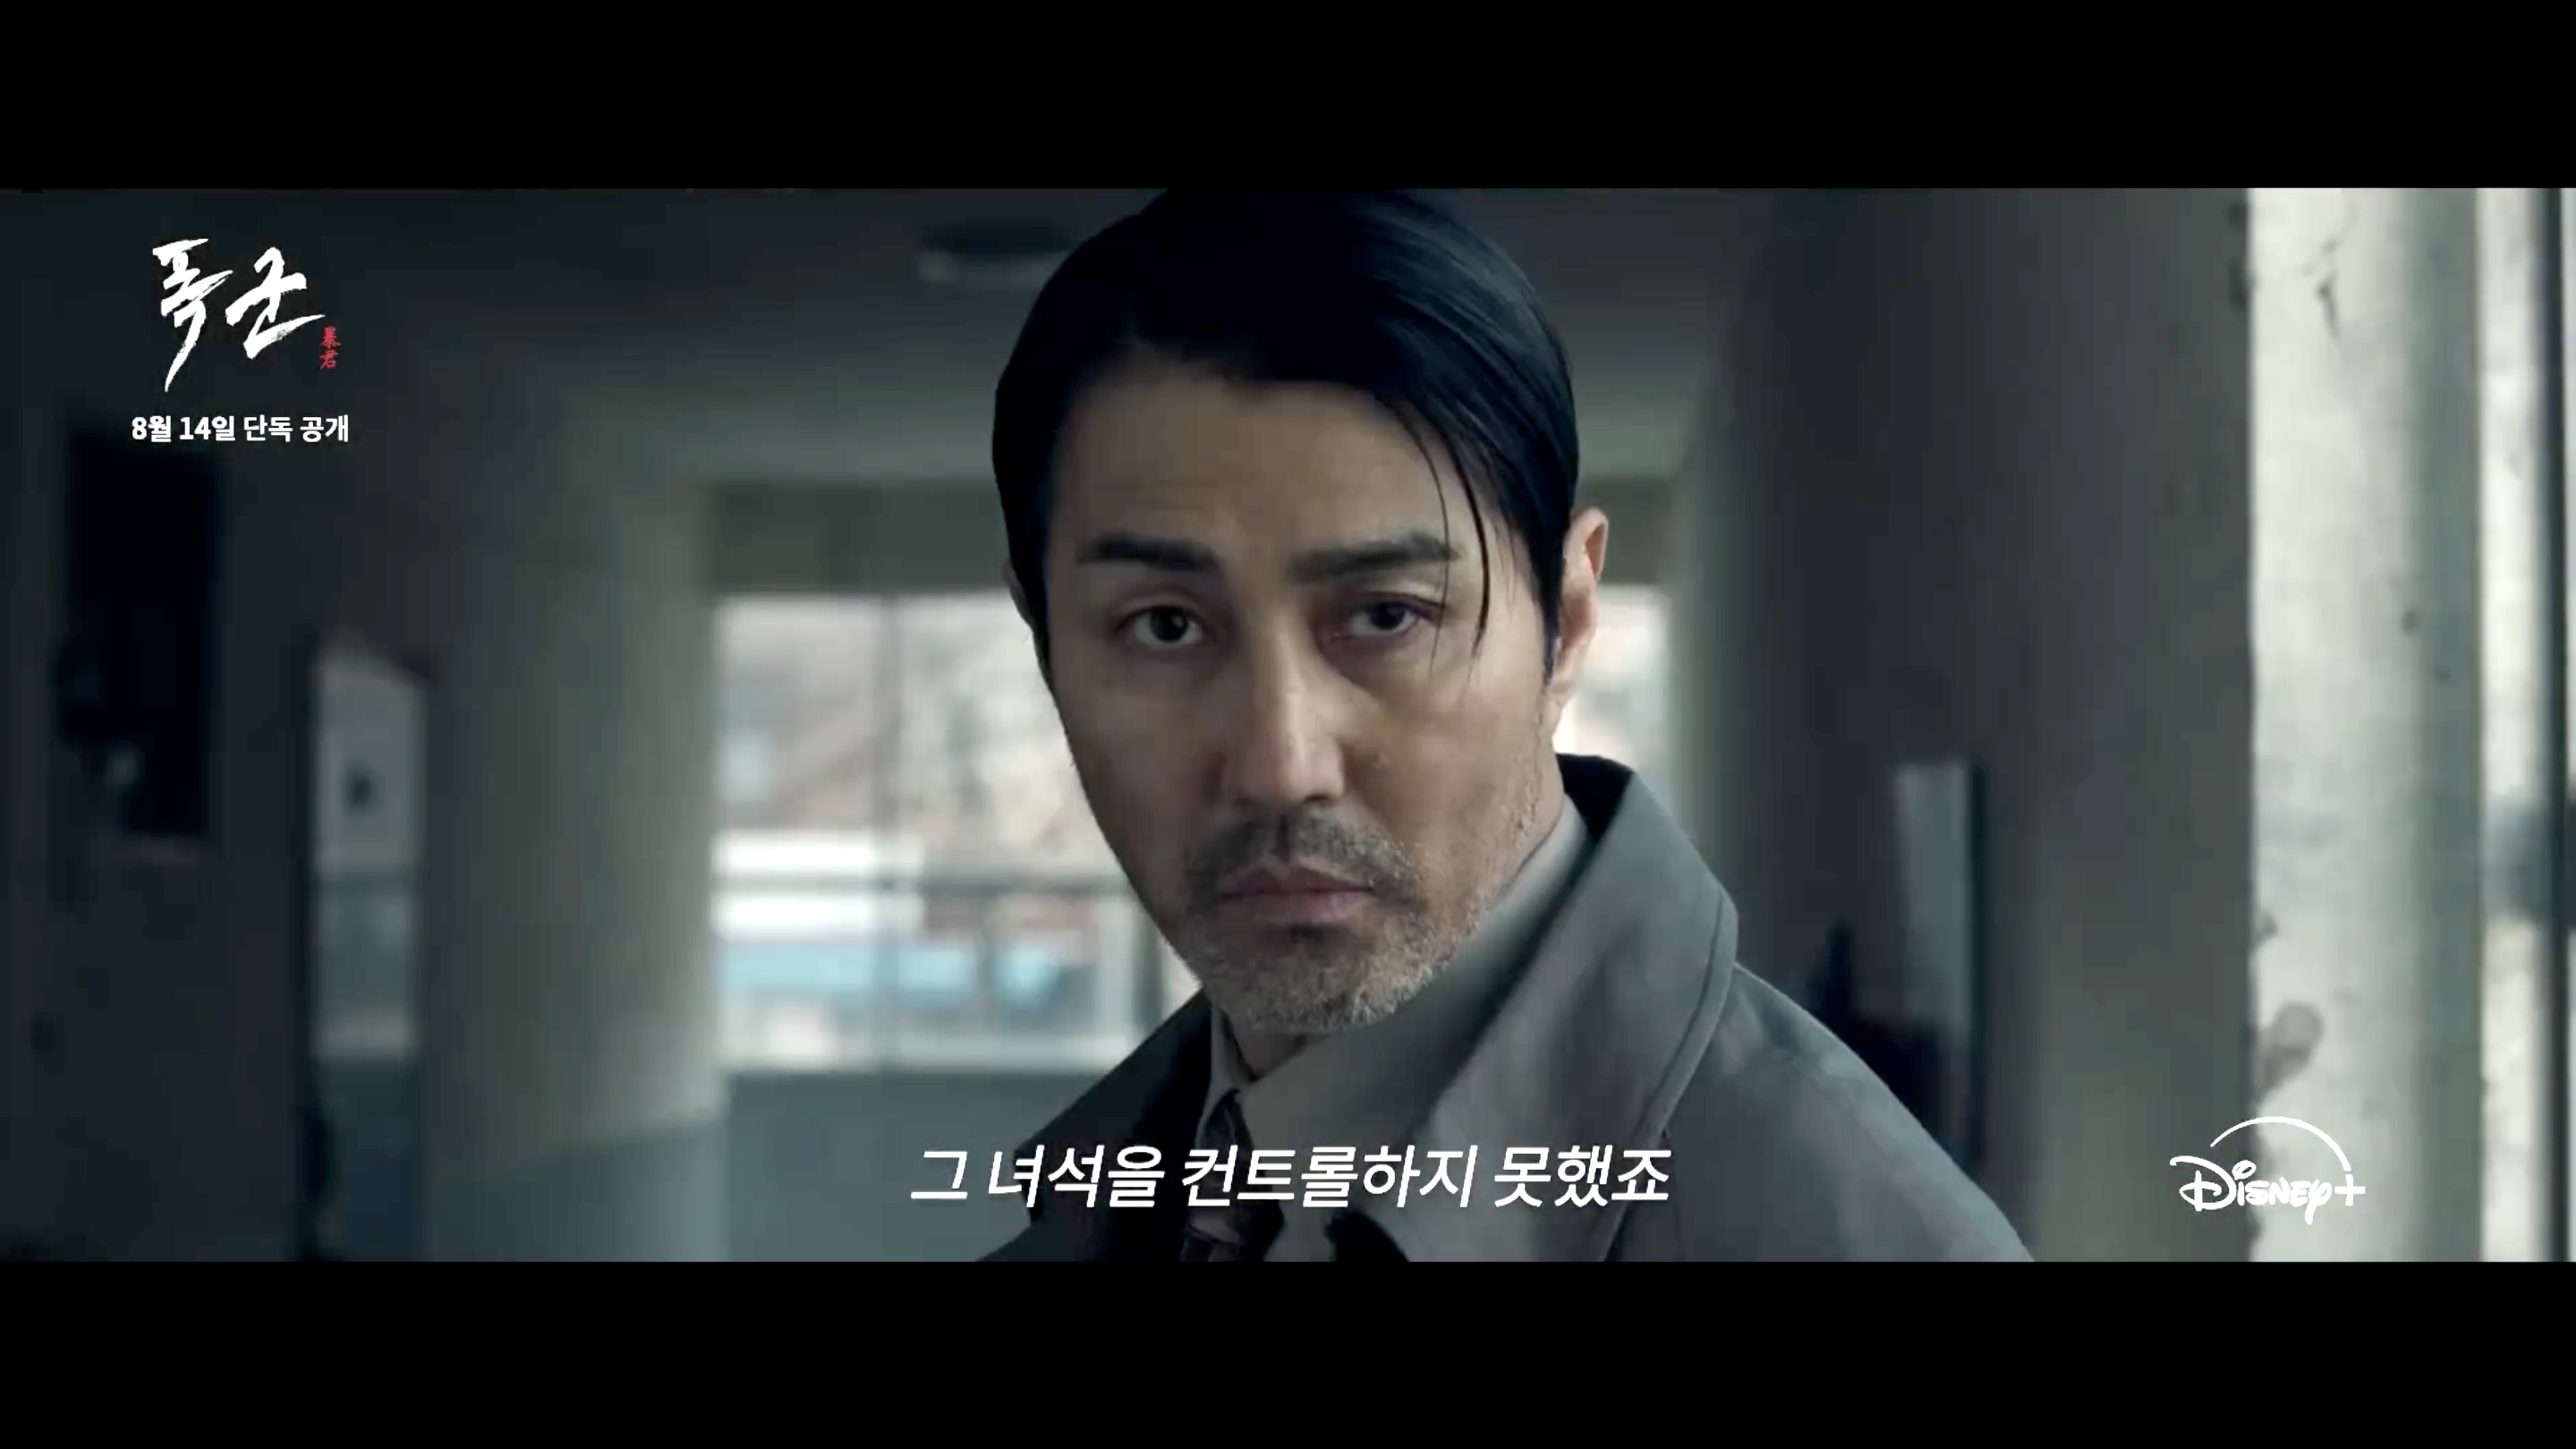 Former agent Cha Seung-won pursues The Tyrant